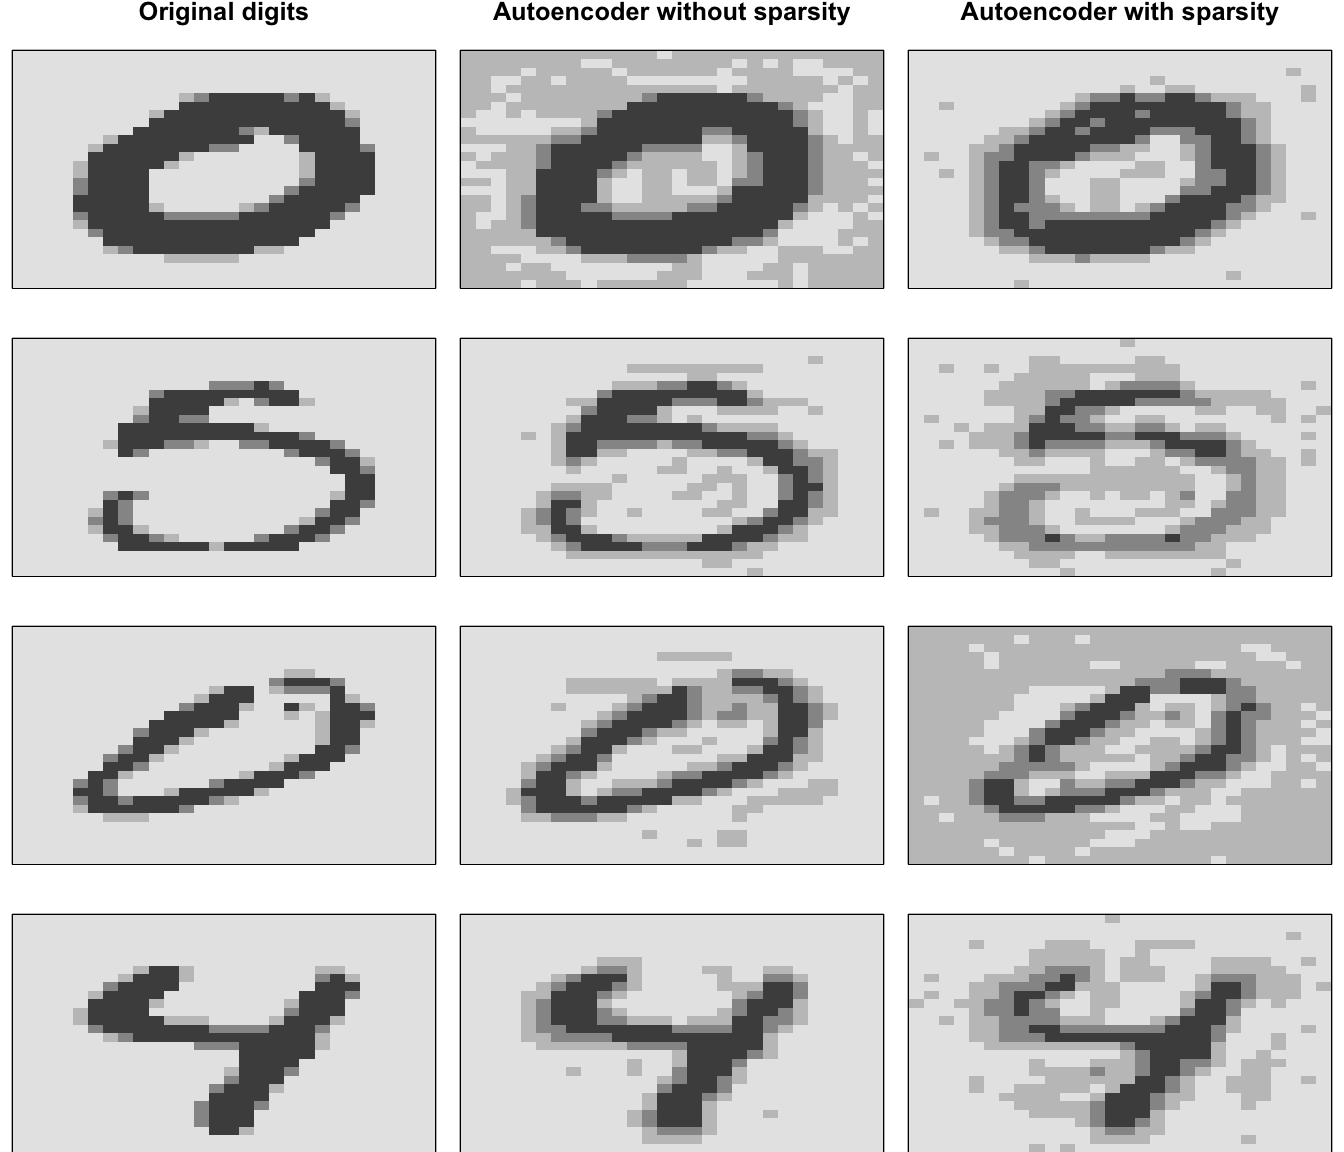 Original digits sampled from the MNIST test set (left), reconstruction of sampled digits with a non-sparse autoencoder (middle), and reconstruction with a sparse autoencoder (right).